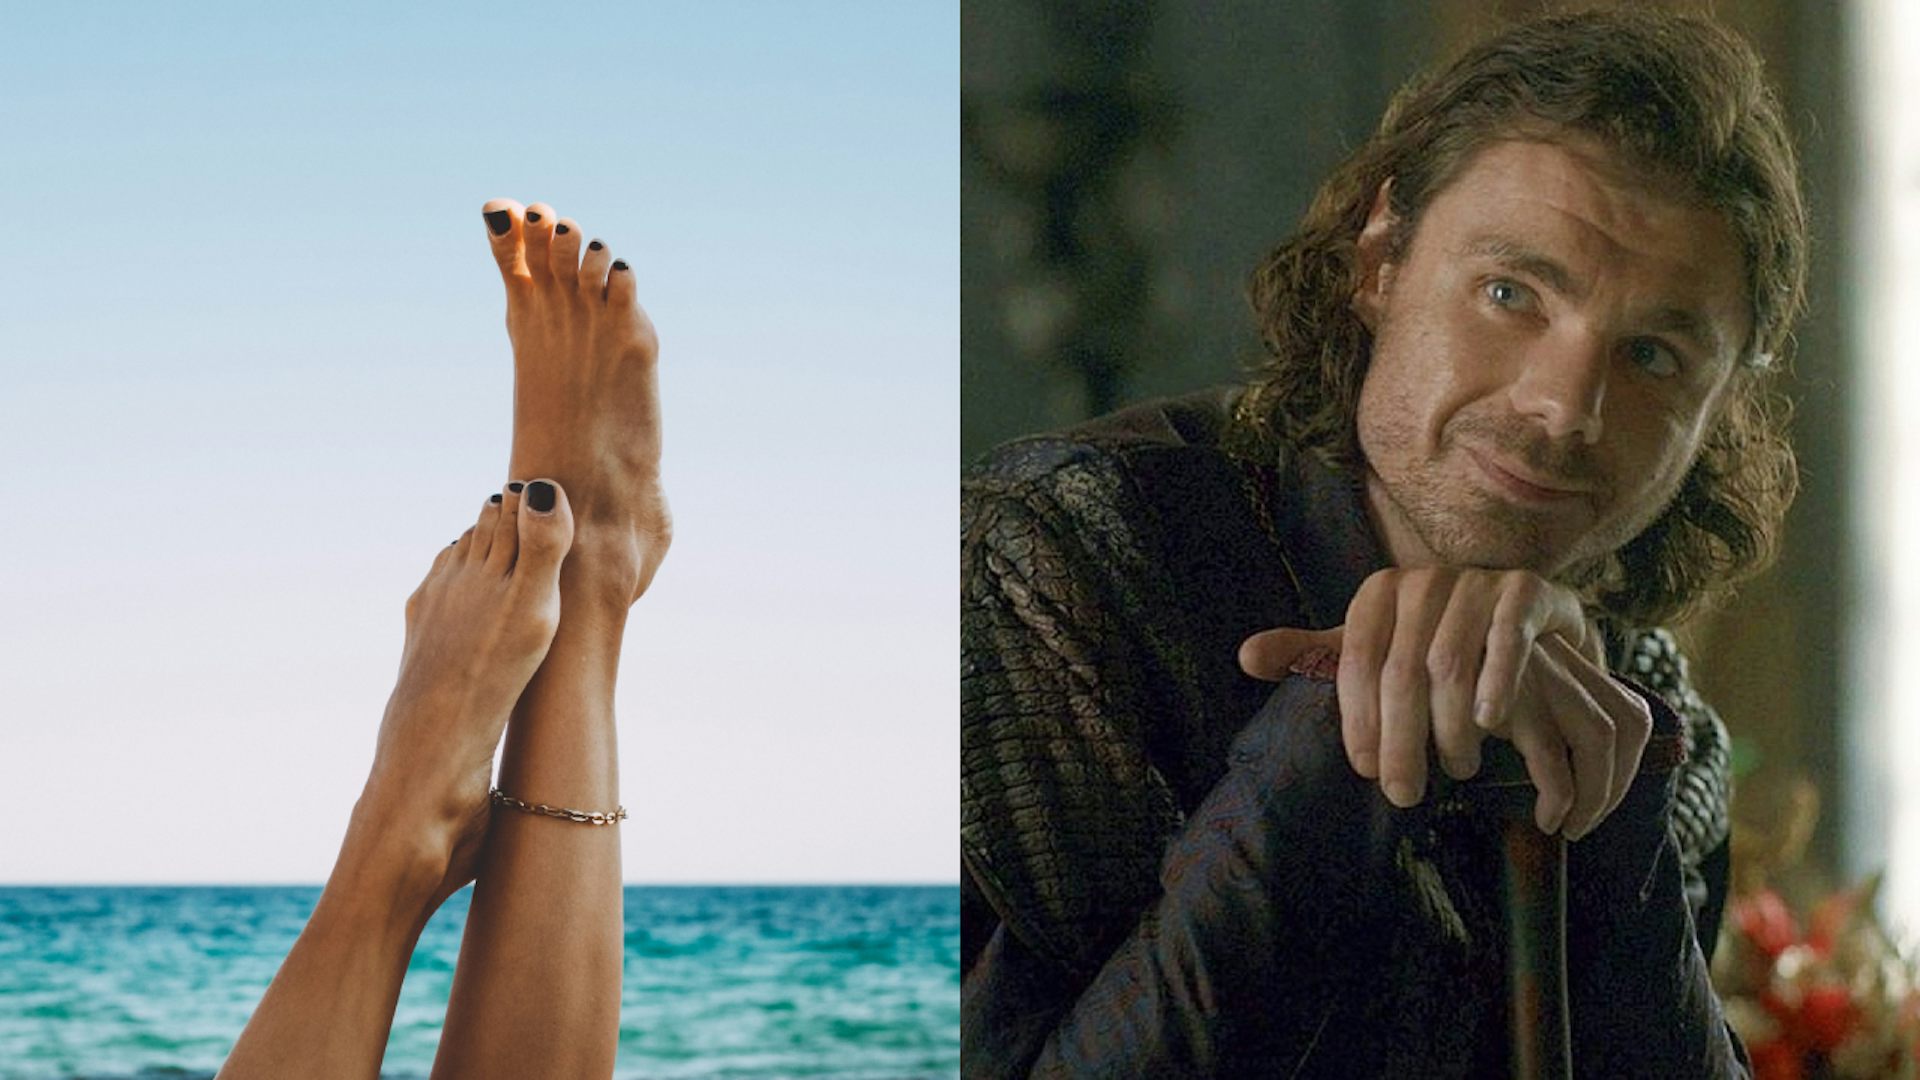 The foot scene in House of the Dragon was upsetting, but its nothing compared to the real history of the fetish pic